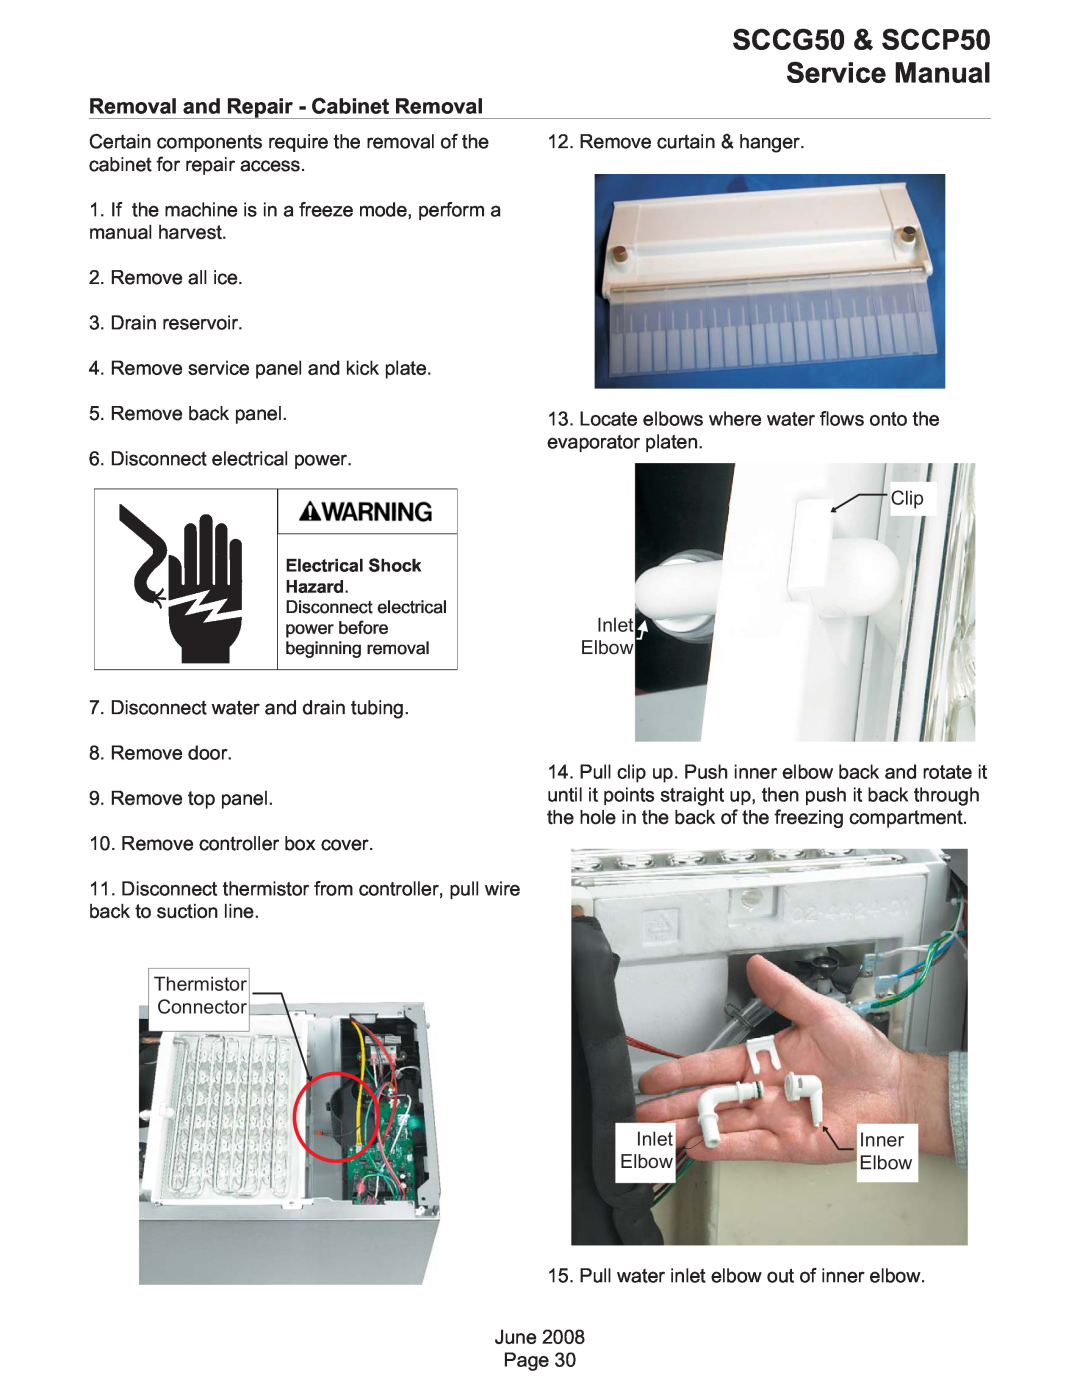 Scotsman Ice SCCG50, SCCP50 service manual Removal and Repair - Cabinet Removal 